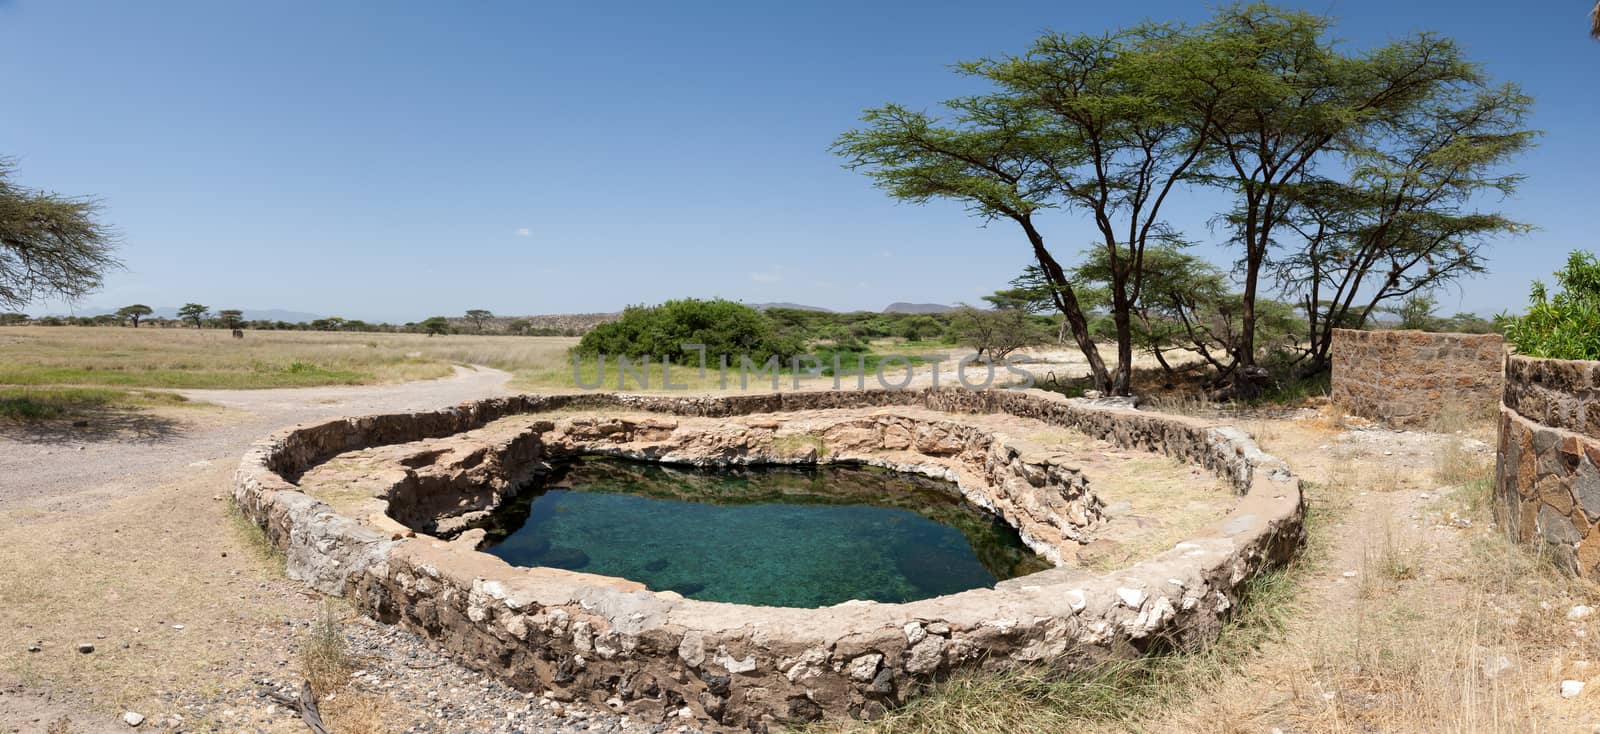 A place named Buffalo Spring in the Samburu National Park by 25ehaag6